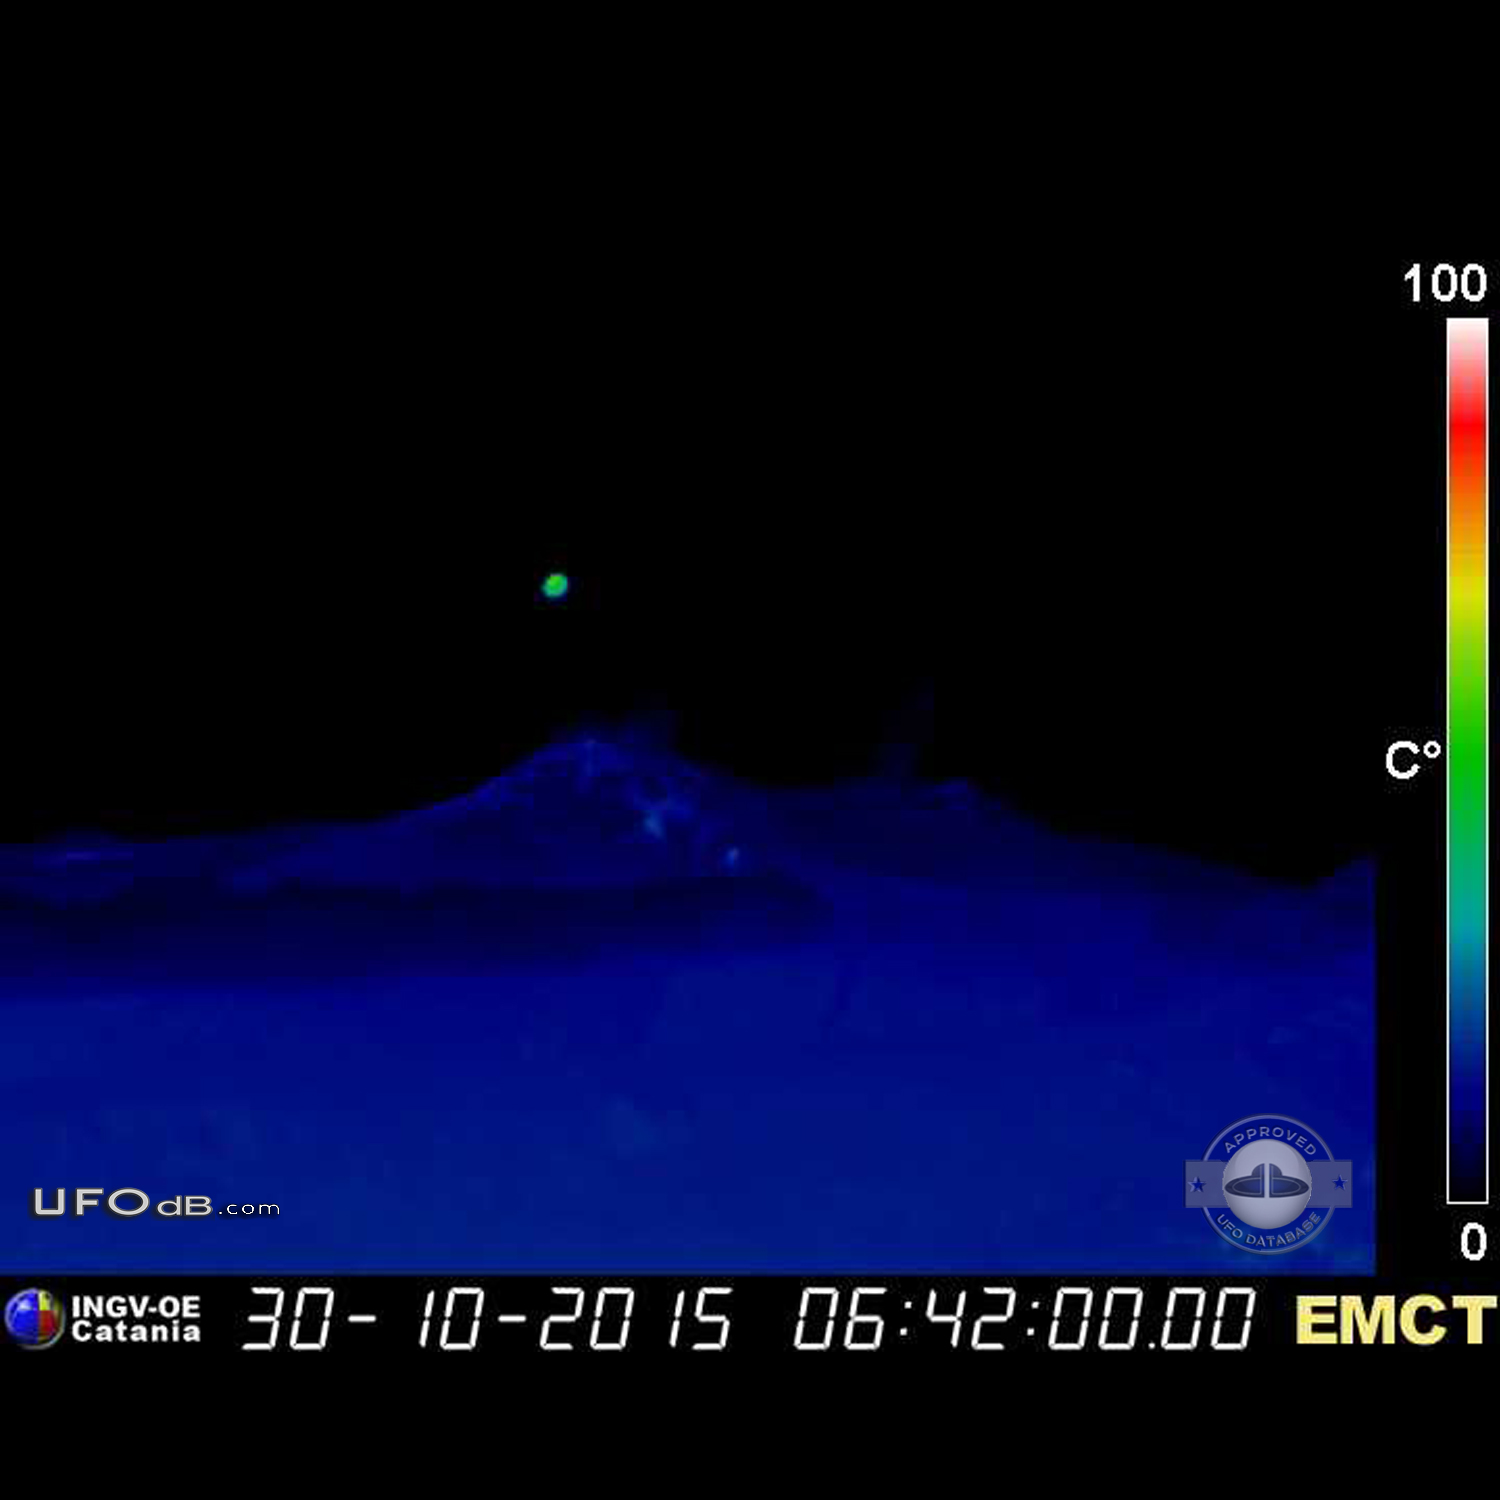 UFO seen over peak of Etna volcano in Sicily for some 15 minutes Catan UFO Picture #750-1